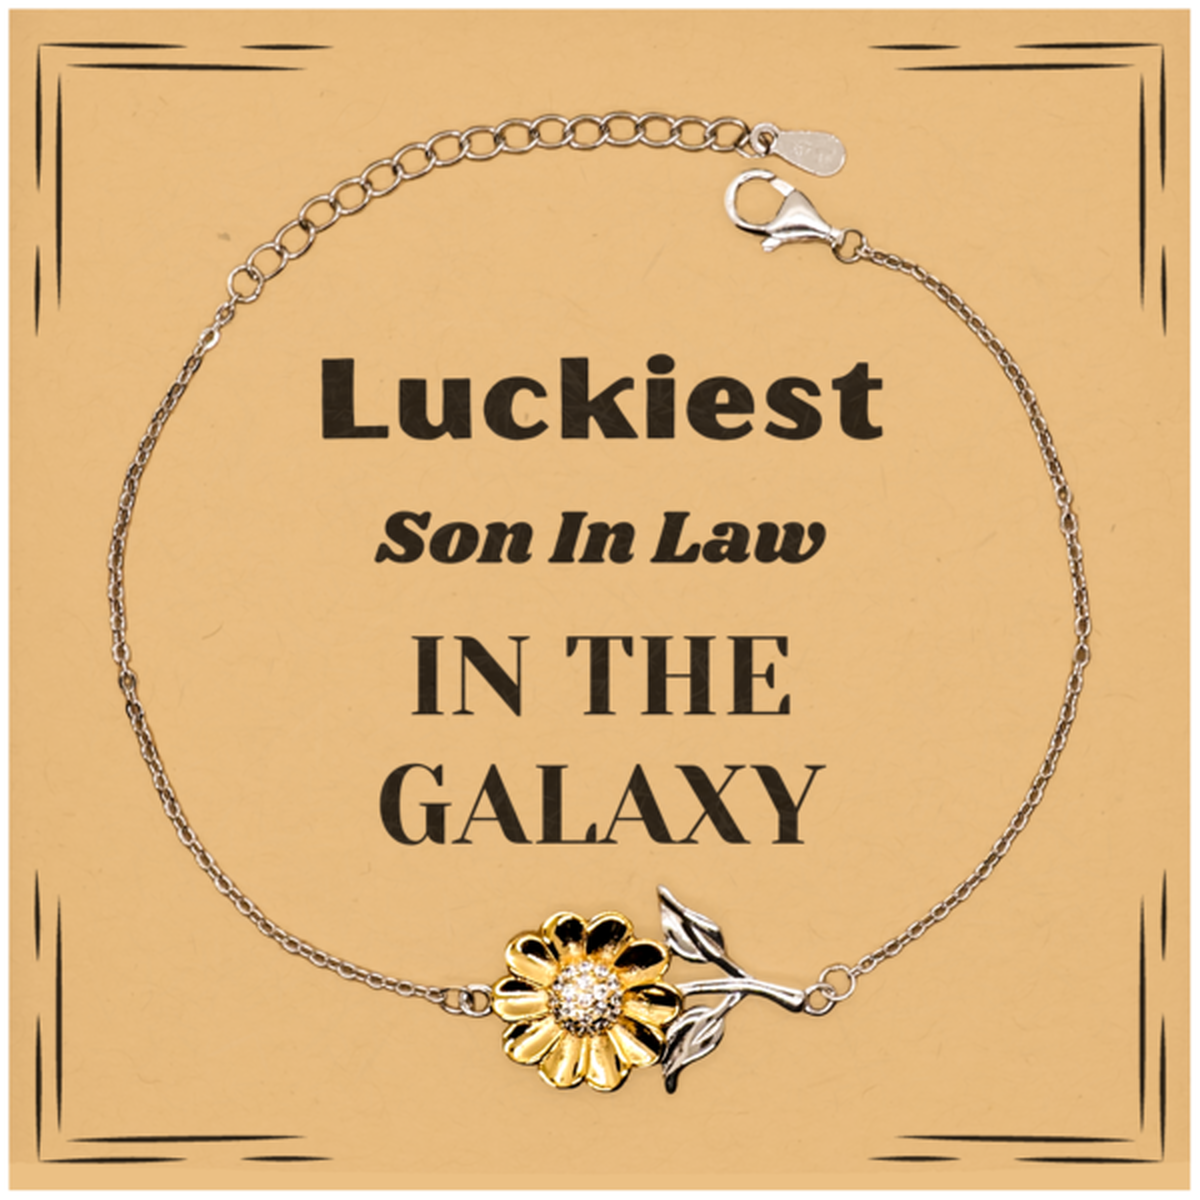 Luckiest Son In Law in the Galaxy, To My Son In Law Message Card Gifts, Christmas Son In Law Sunflower Bracelet Gifts, X-mas Birthday Unique Gifts For Son In Law Men Women